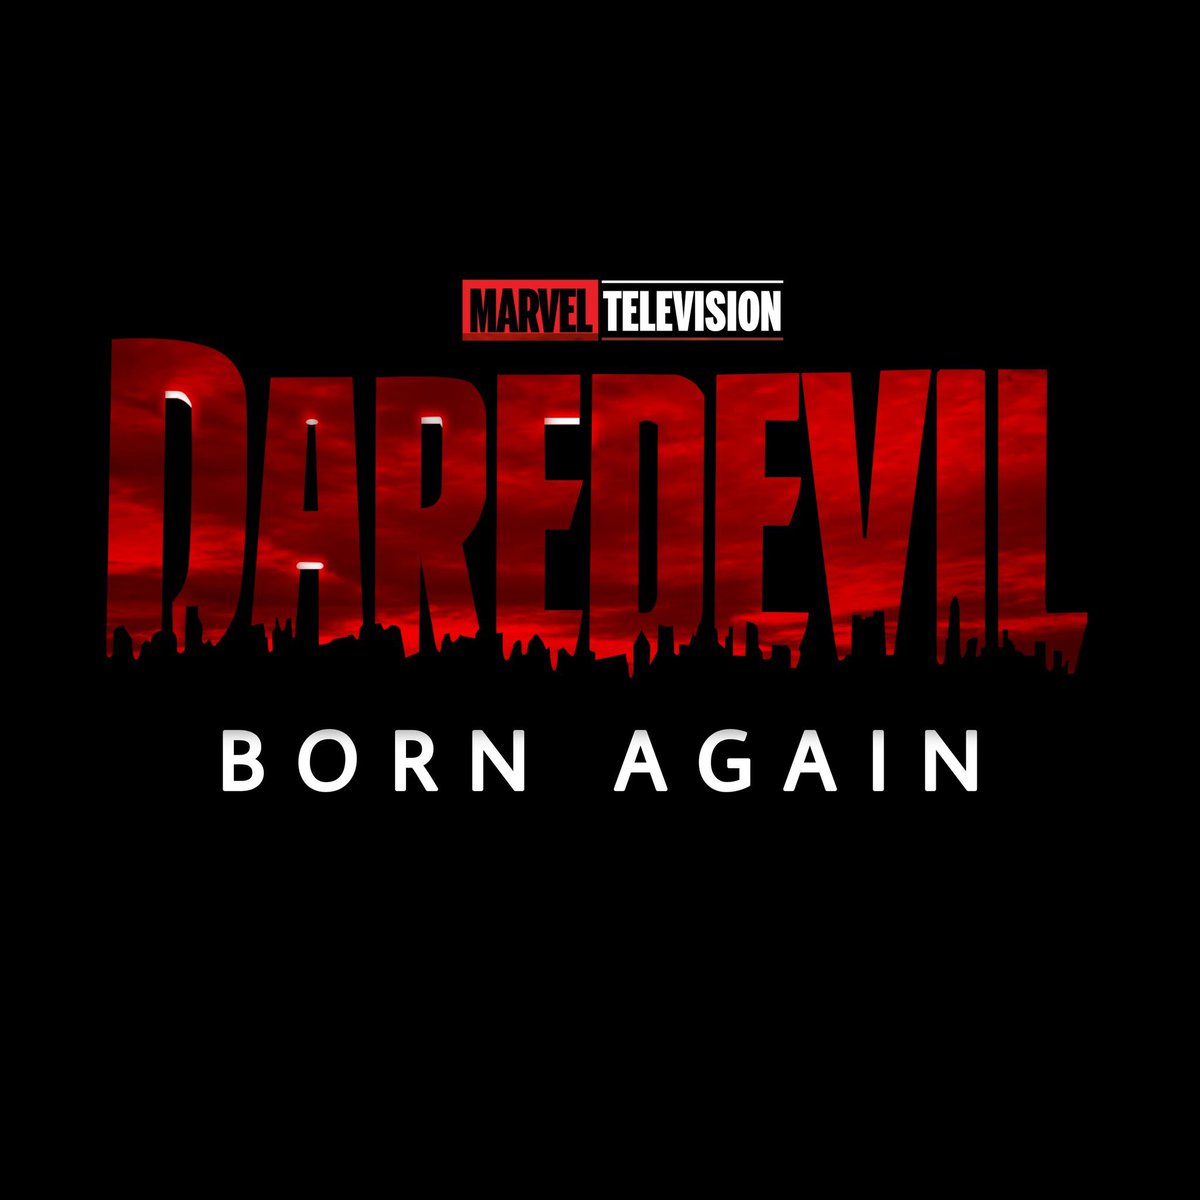 Vincent D'Onofrio and Charlie Cox say 'DAREDEVIL: BORN AGAIN' will crossover a lot with the original 'DAREDEVIL' series and that prior to the mid-season creative overhaul it originally wasn't going to at all. 

(via: tvinsider.com/1136276/darede…)